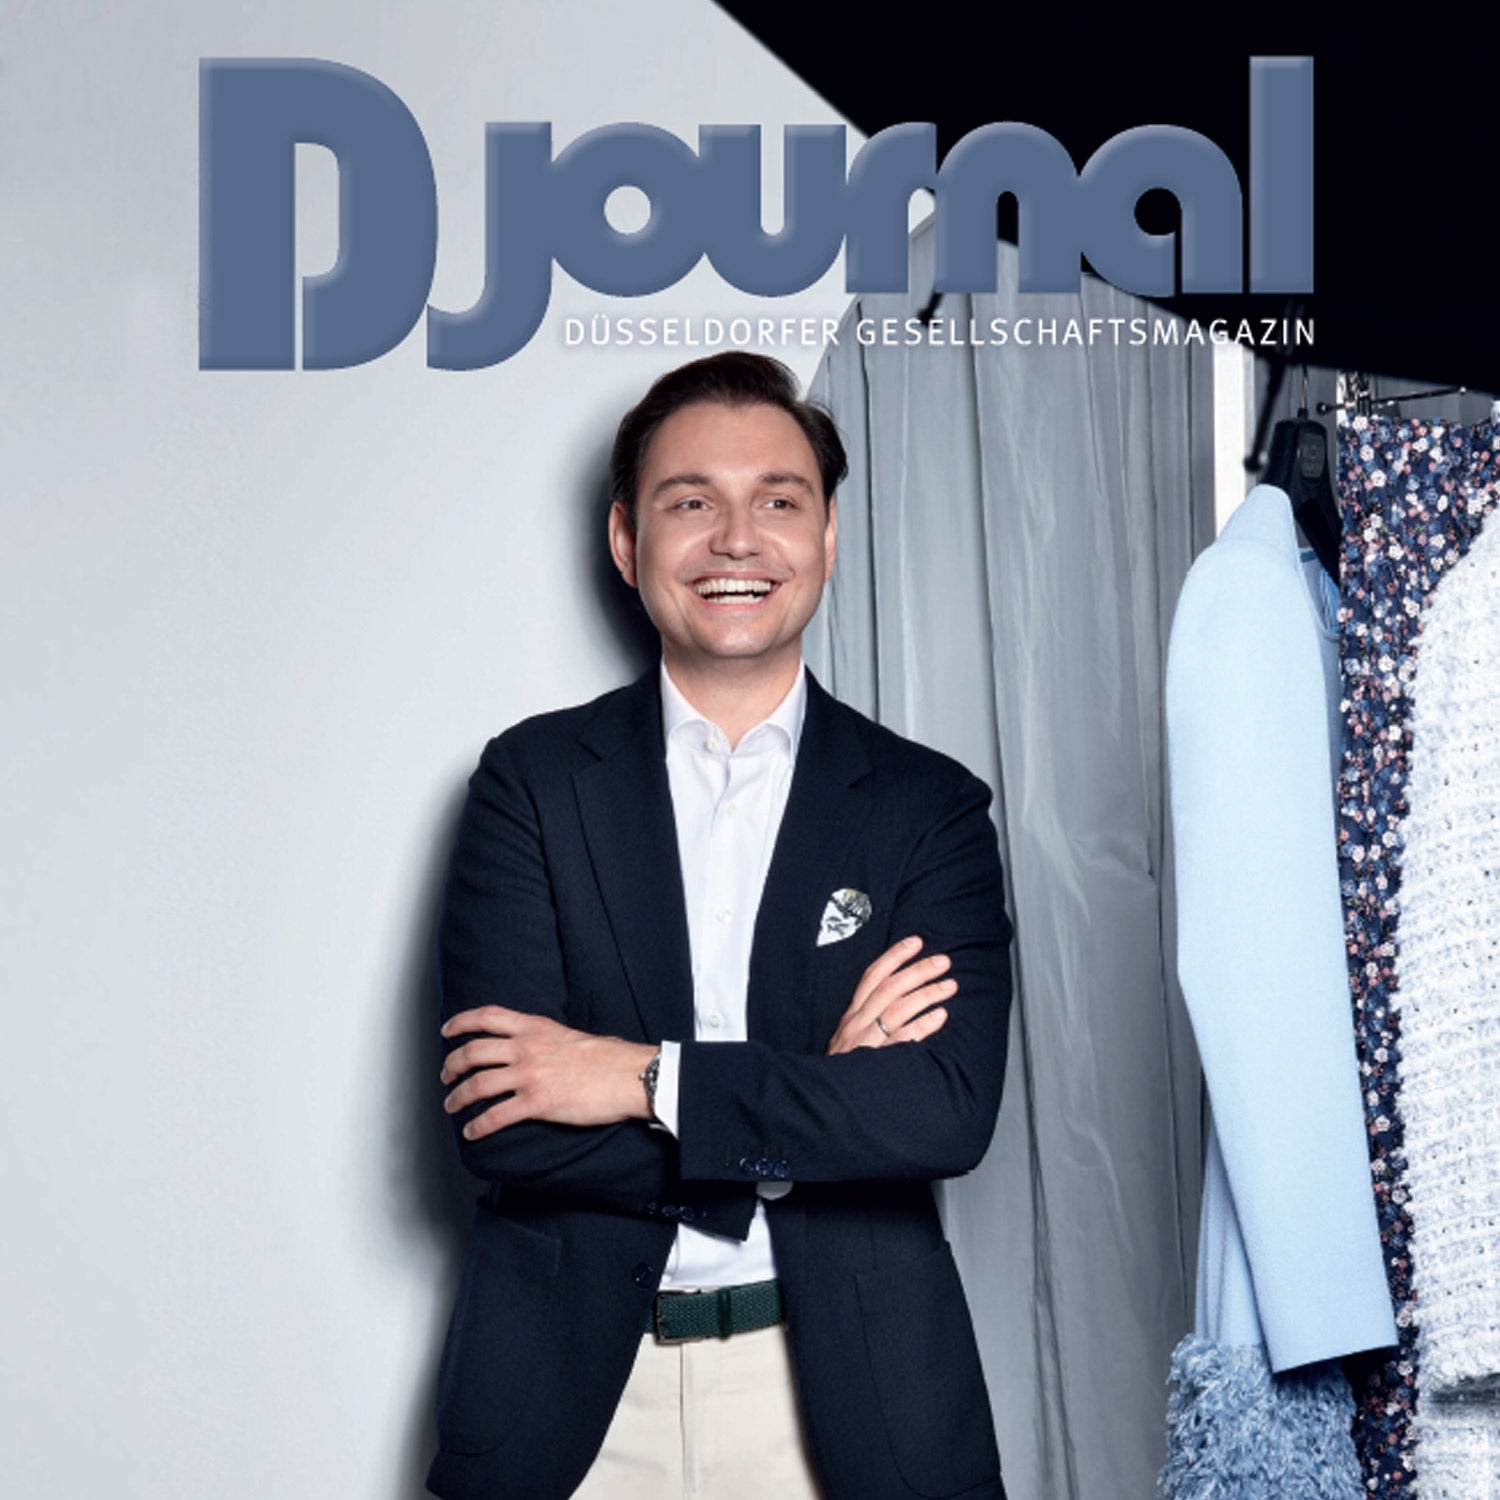 On the cover of DJournal